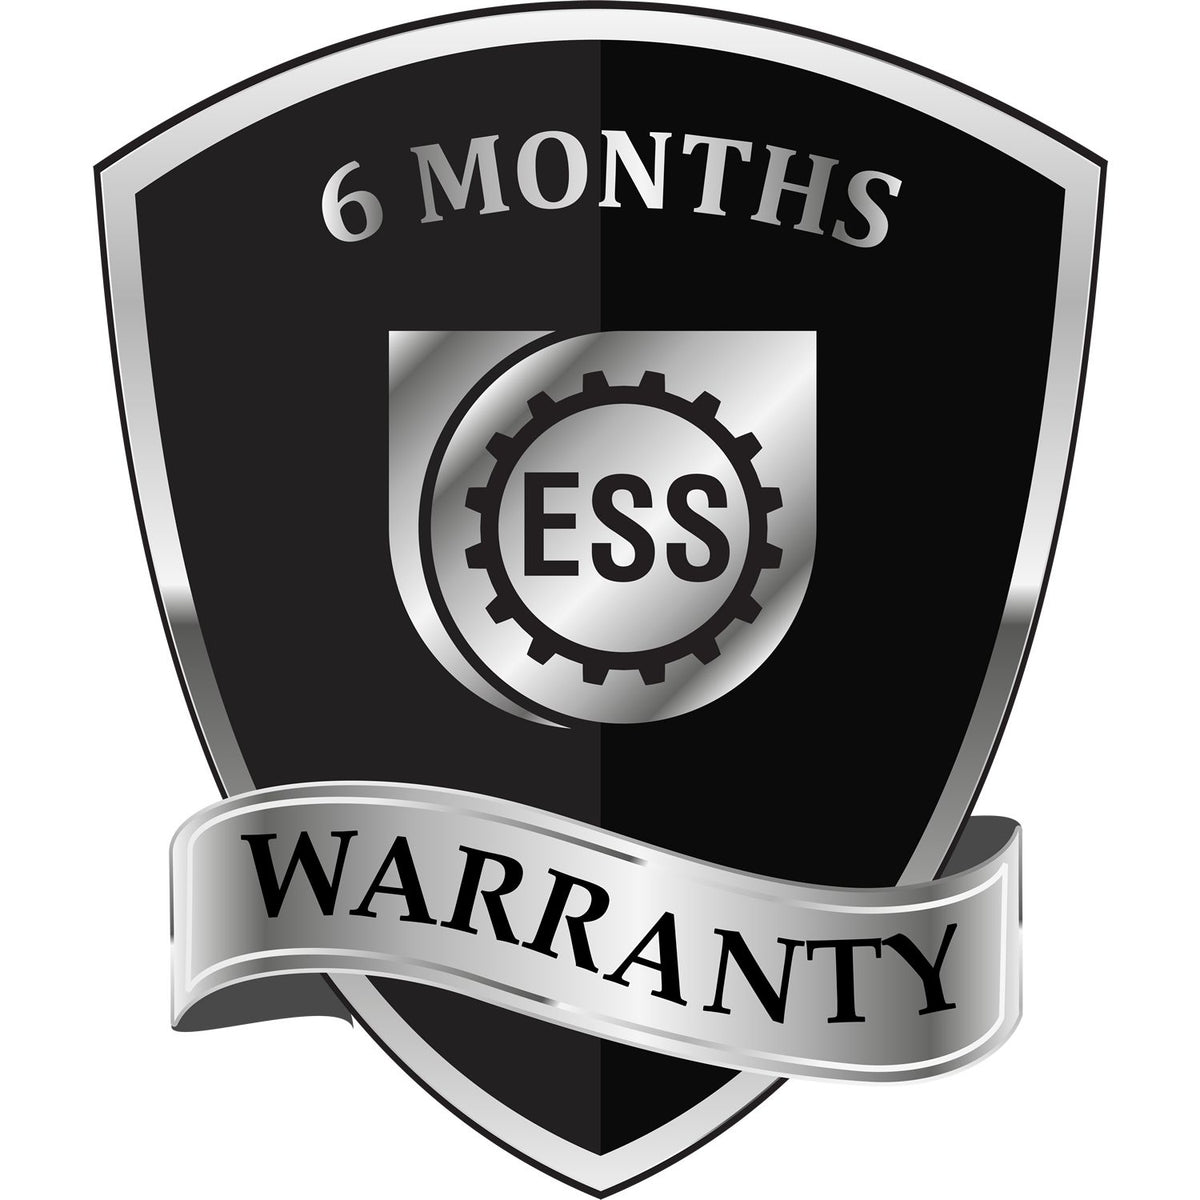 A badge or emblem showing a warranty icon for the North Carolina Professional Engineer Seal Stamp